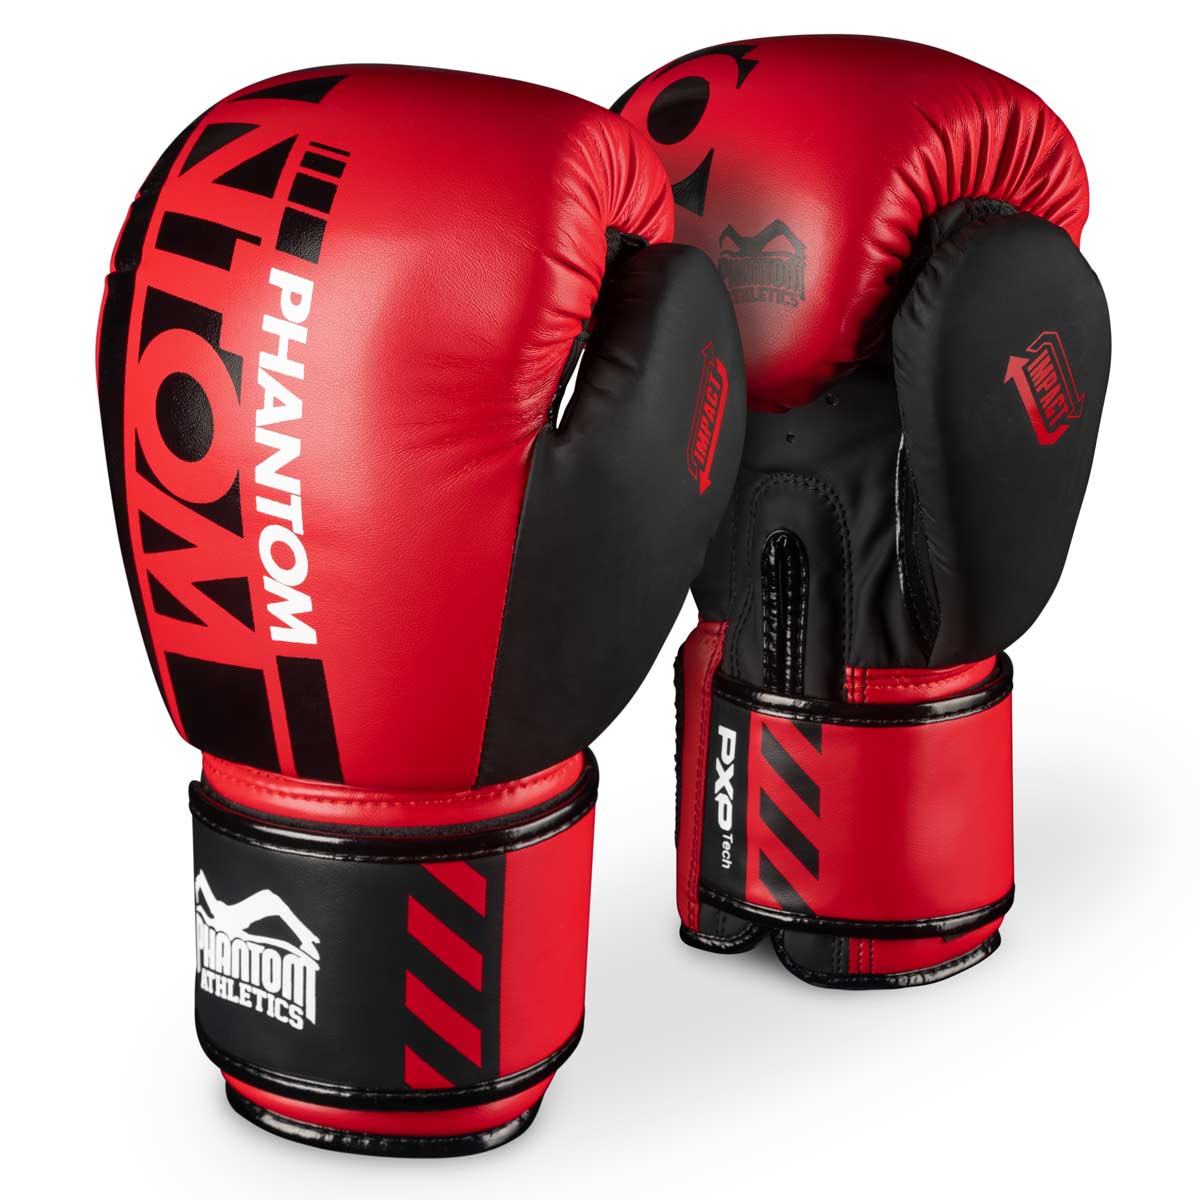 Phantom boxing gloves APEX in the limited RED edition. Perfect gloves for your martial arts training such as MMA, Muay Thai, Thai boxing, K1 or boxing.